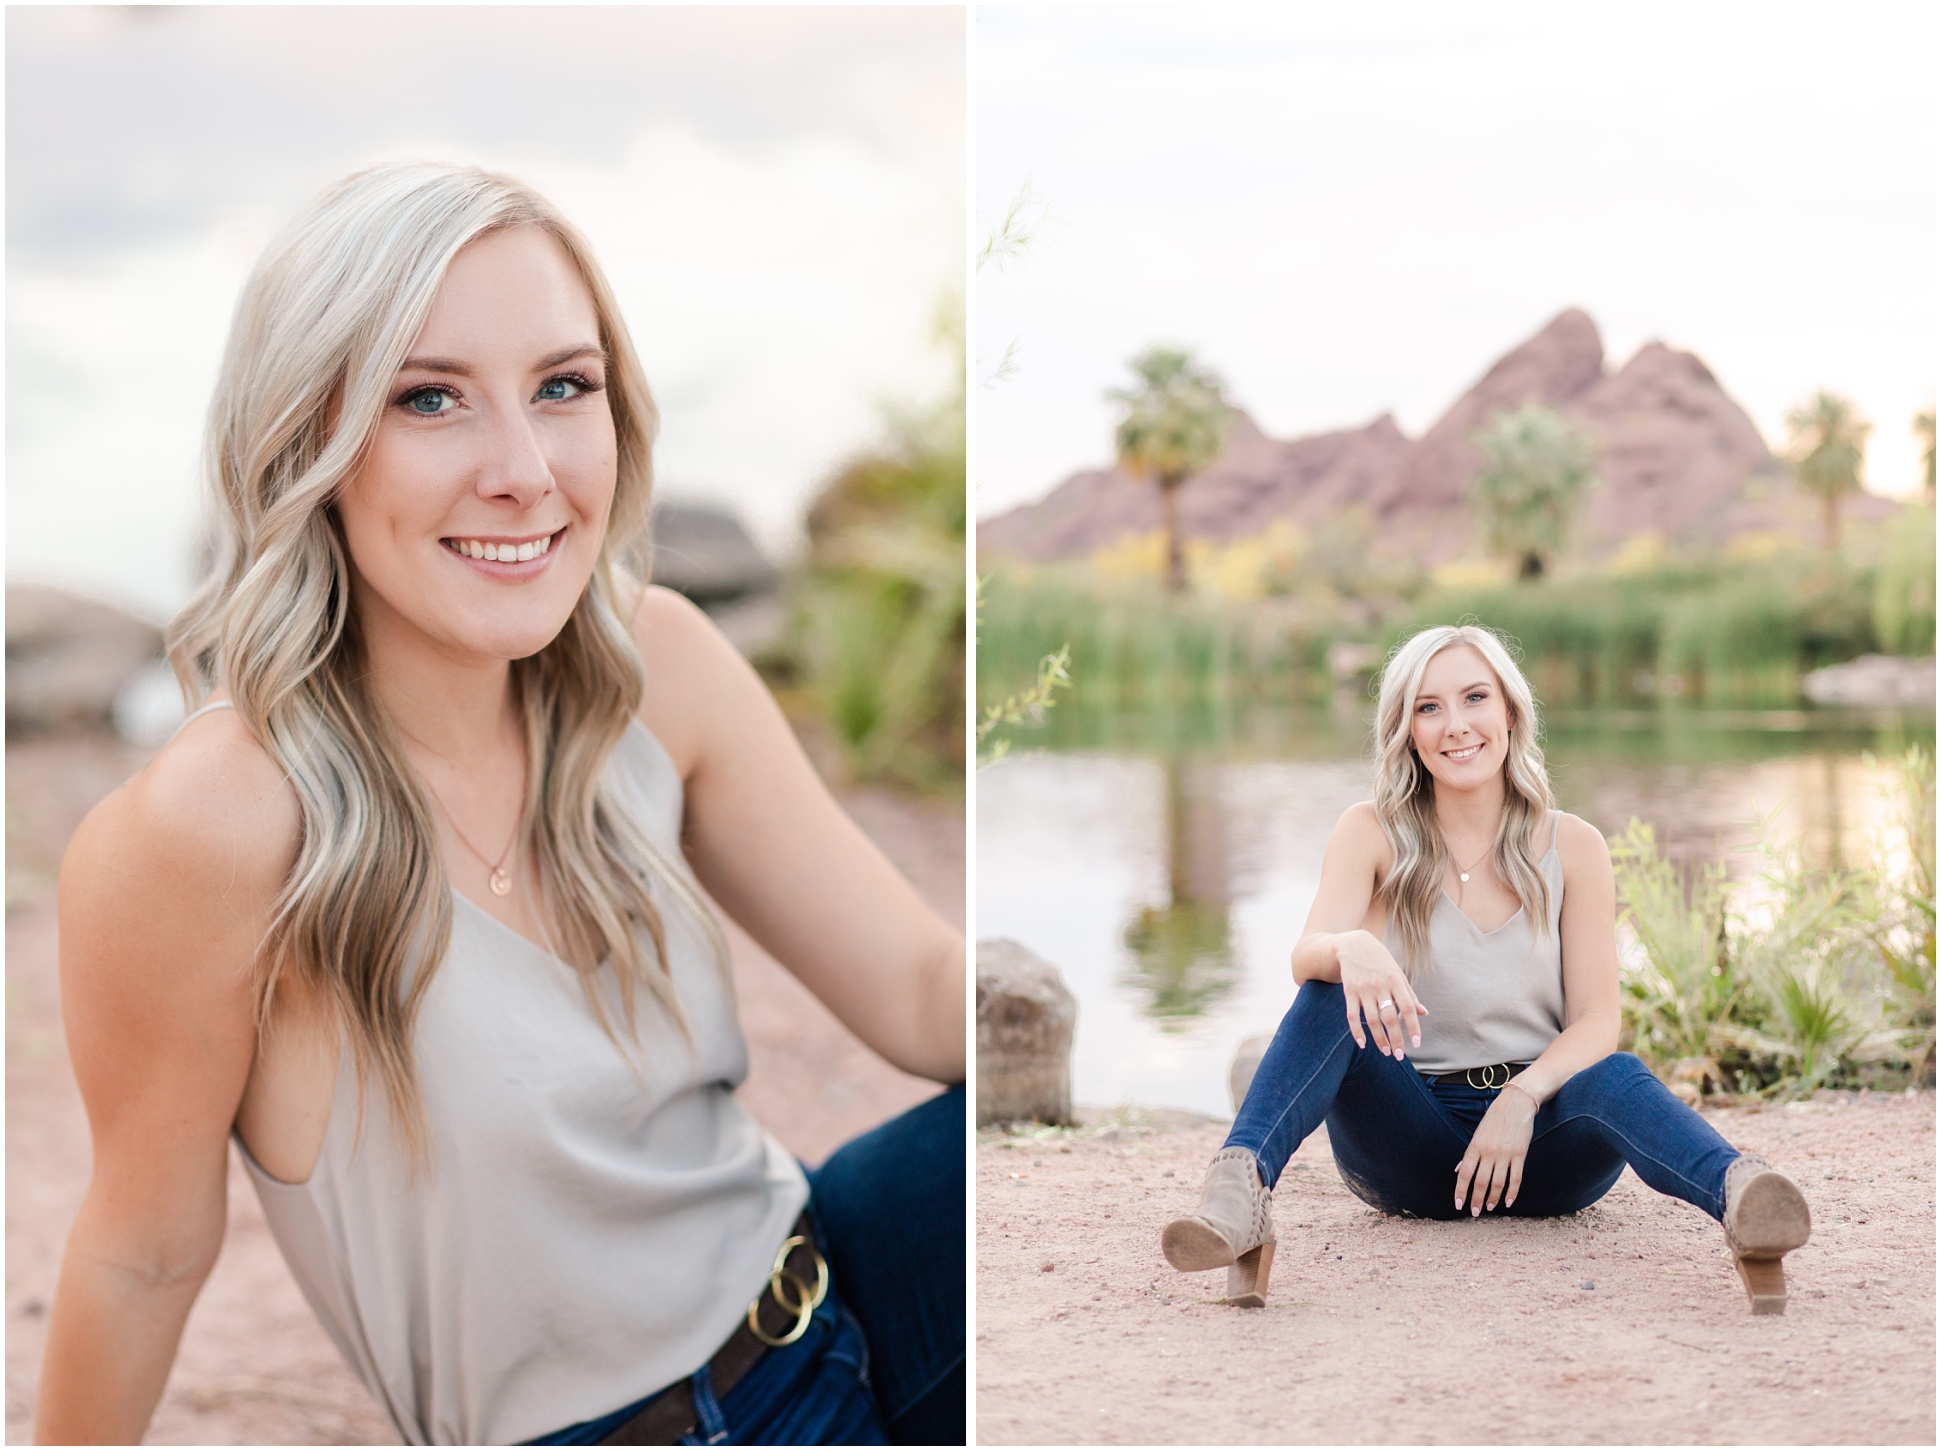 Two Images of Kaitlynn Schares sitting by the community pond